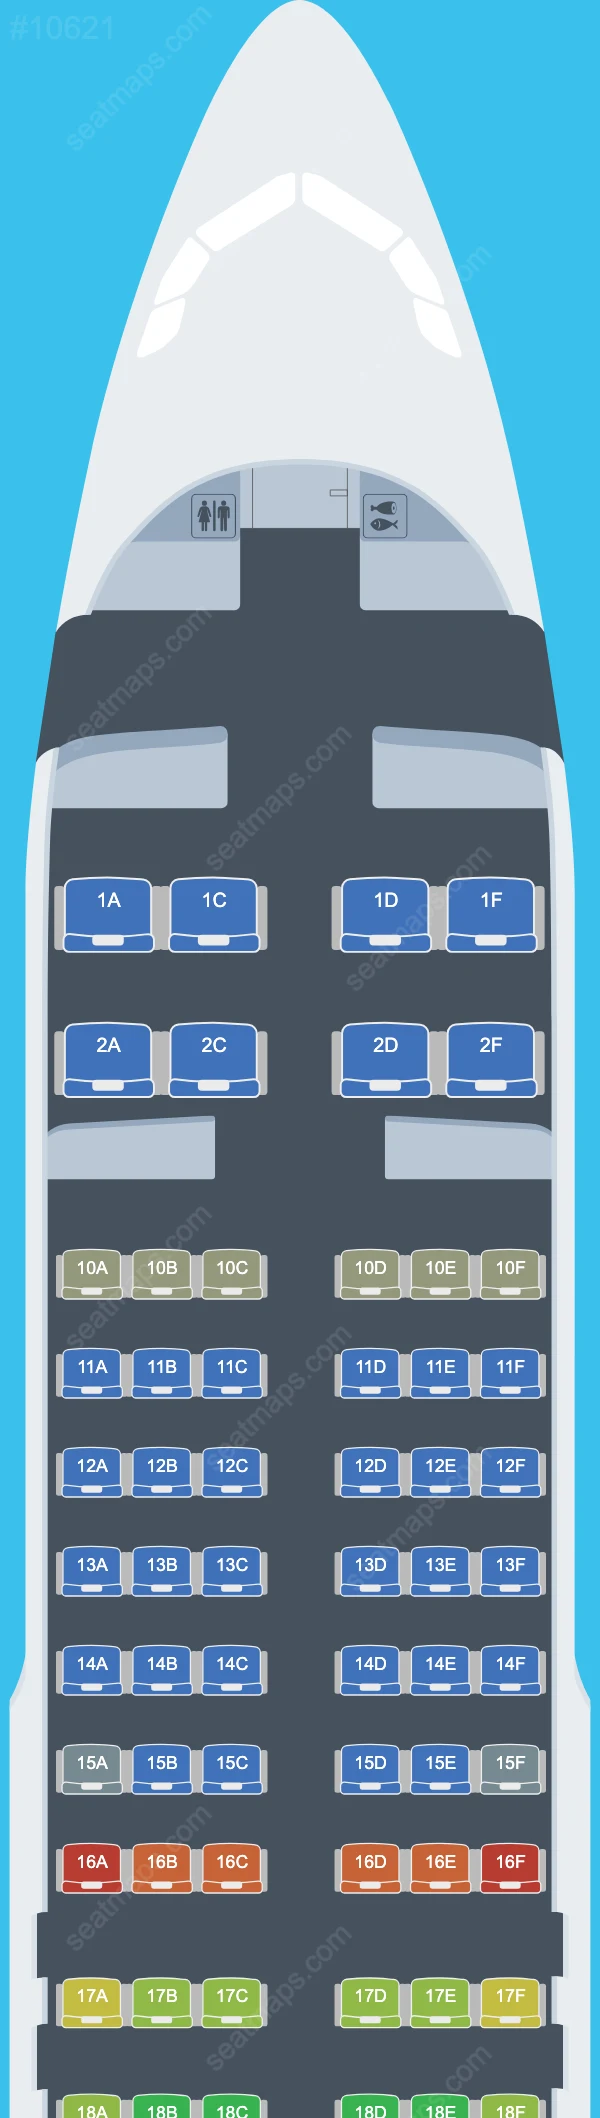 FITS Aviation Airbus A320 Seat Maps A320-200